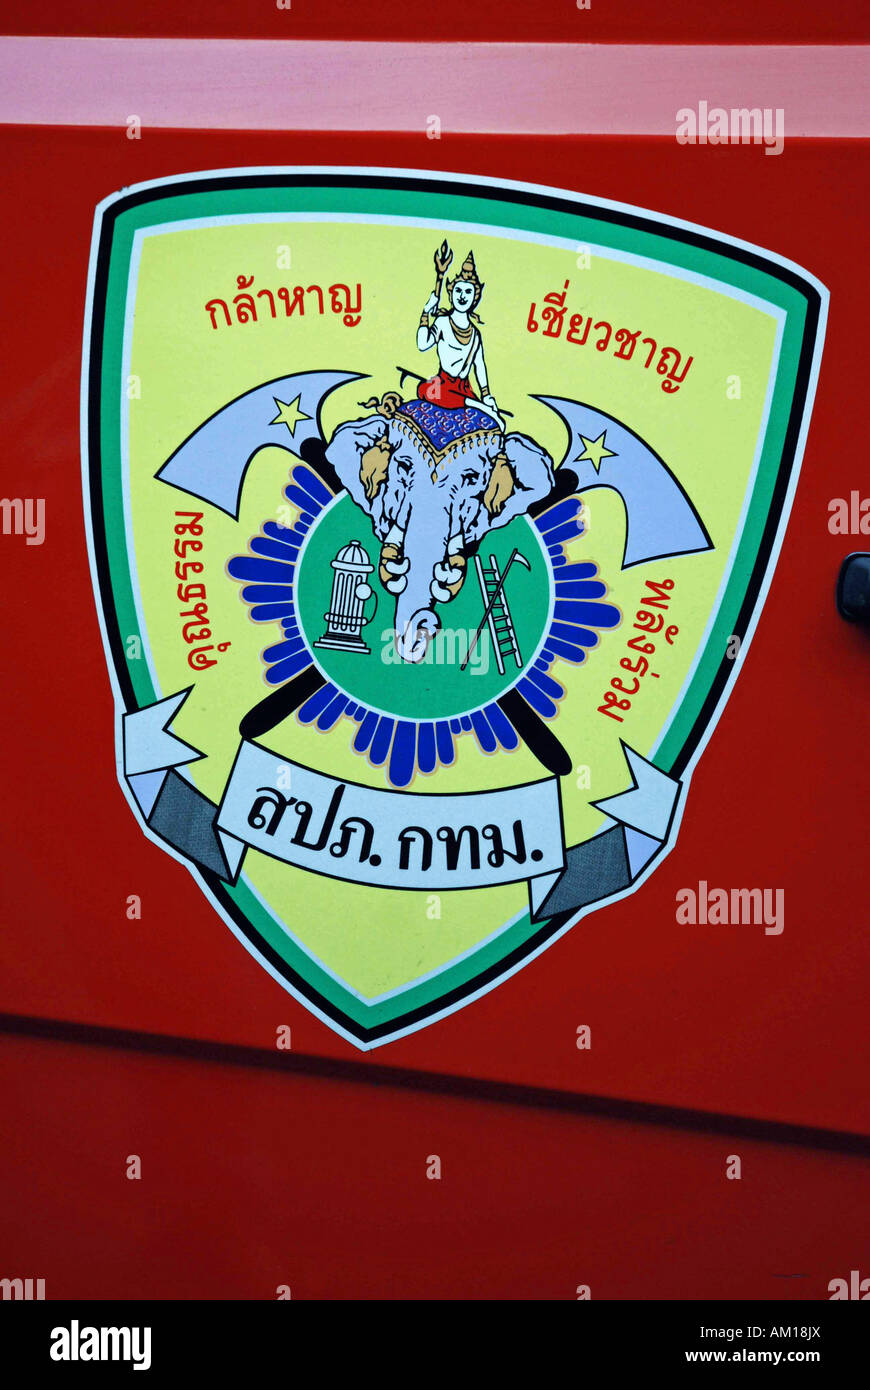 Coat of arms of the fire brigade, Thailand, Asia Stock Photo